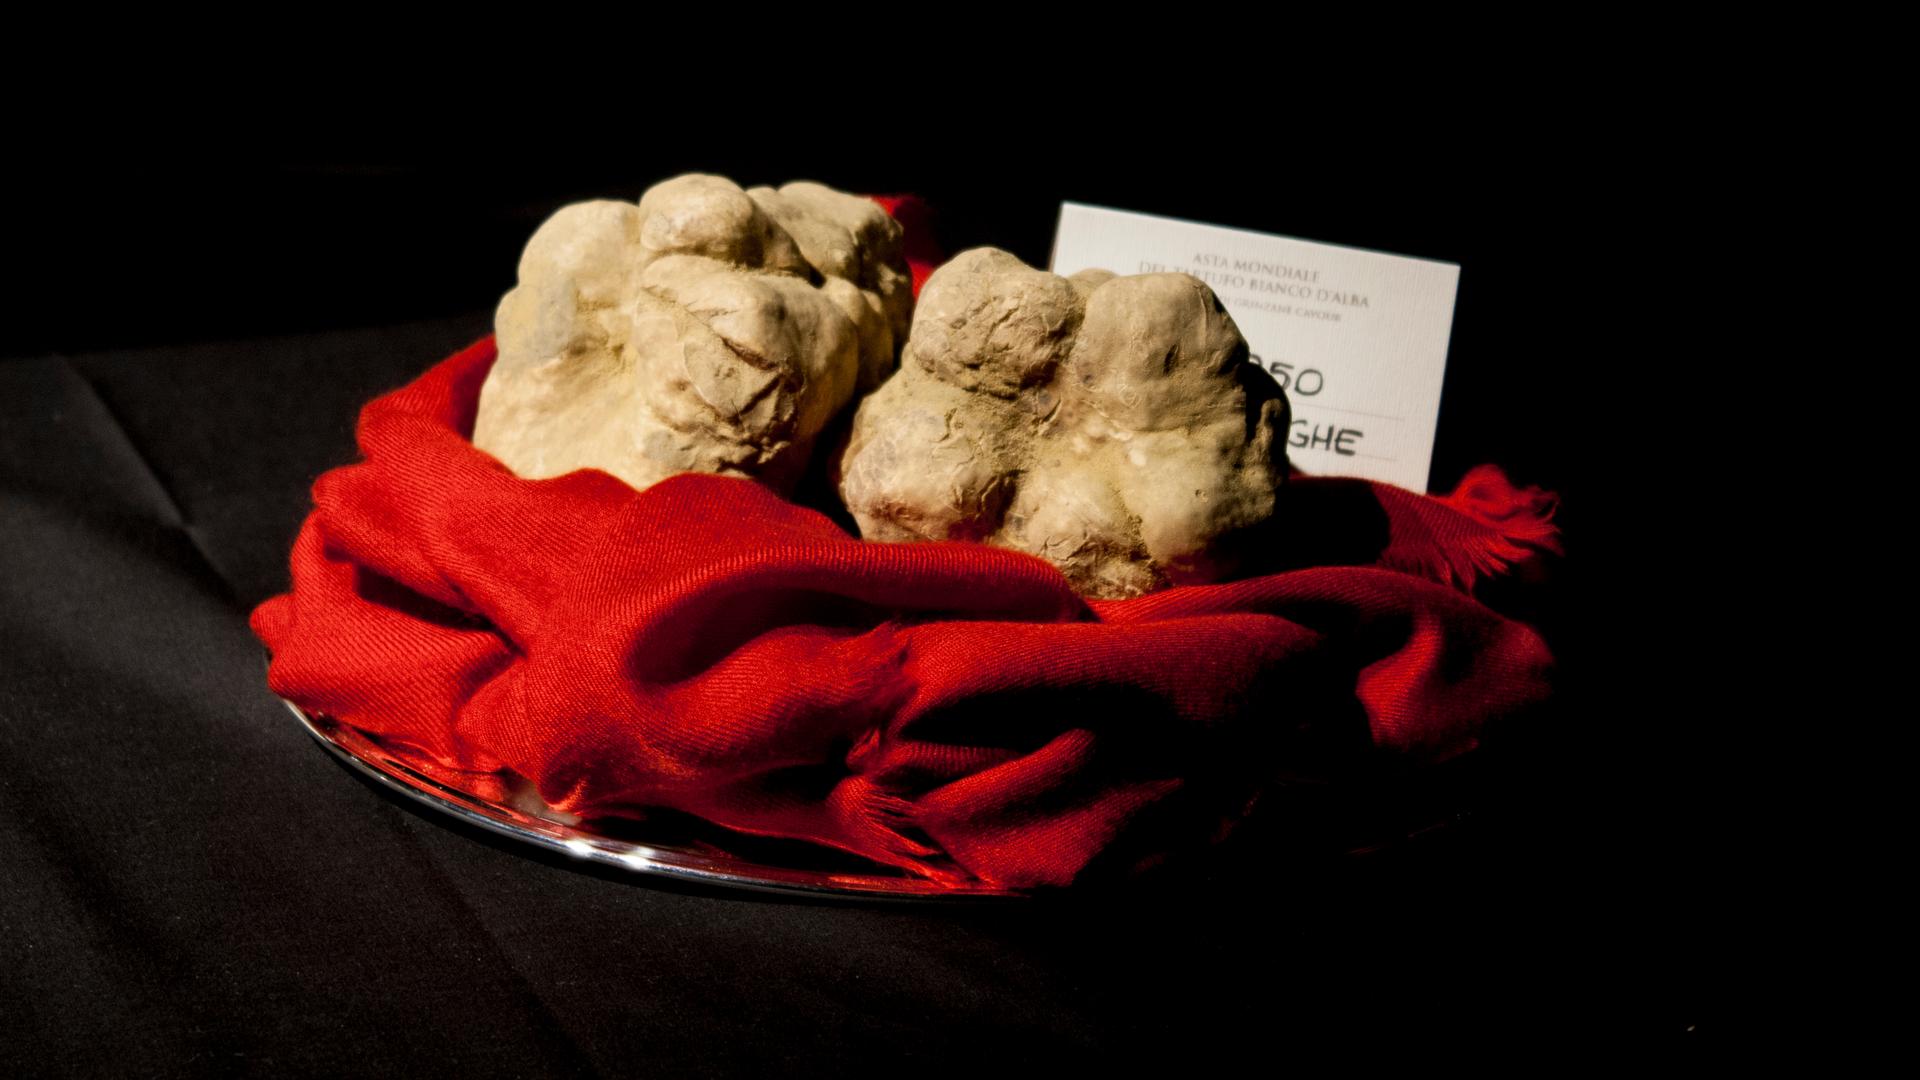 Truffles wait on a silver platter to be sold at the International Truffle Auction in Alba, Italy. 